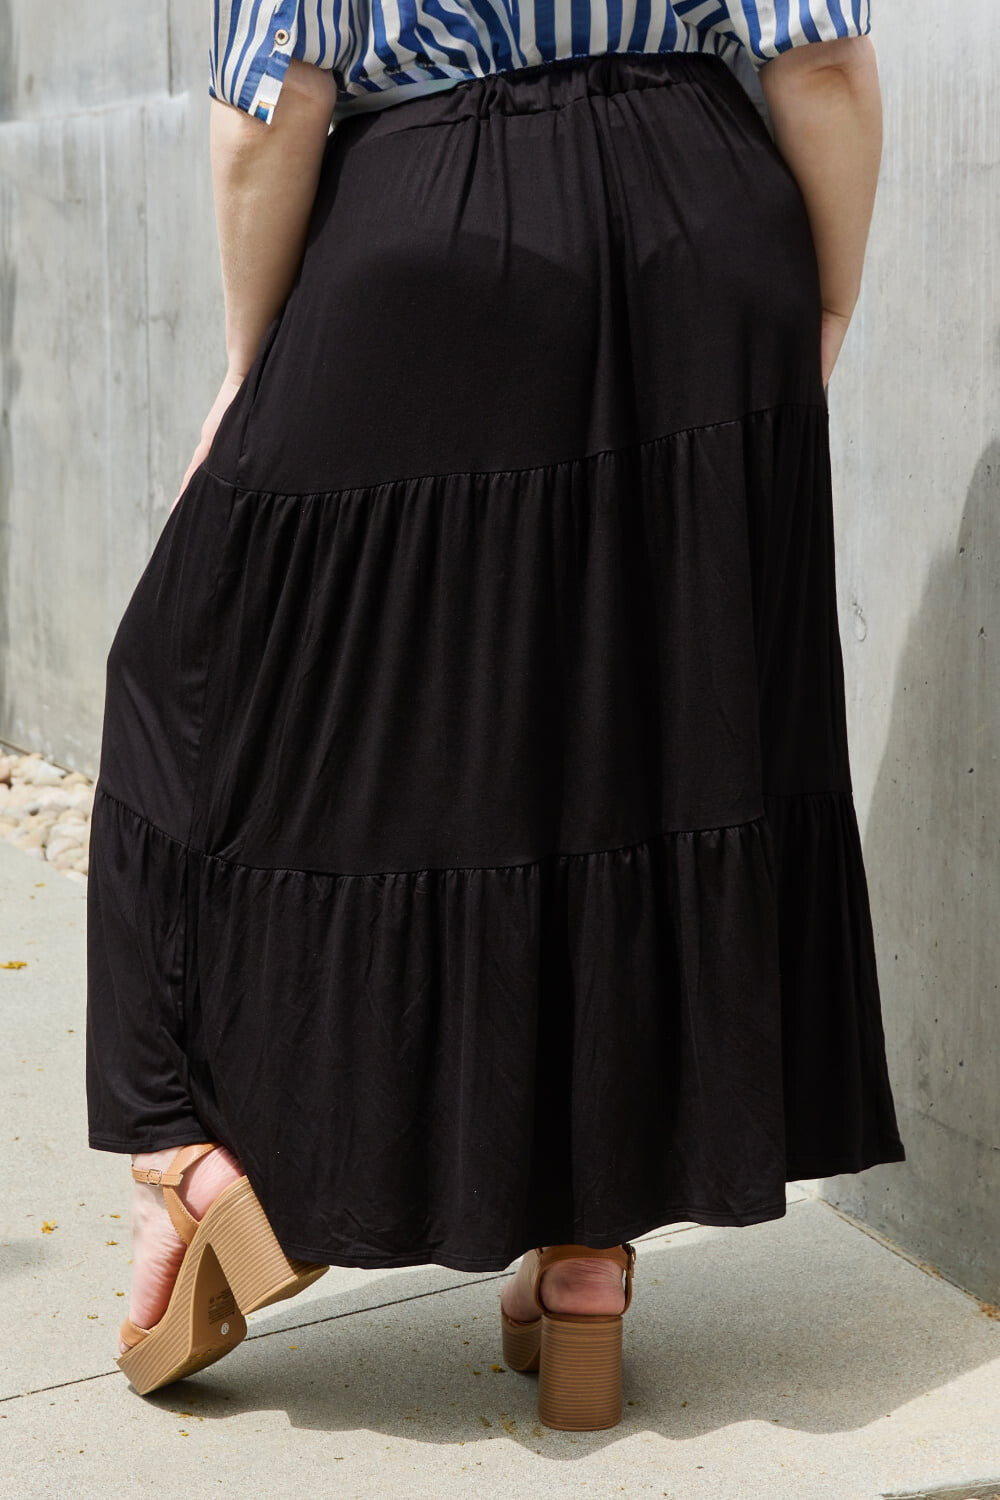 Plus size back detail - Missionary modest maxi skirt from Nauvoo Supply Co